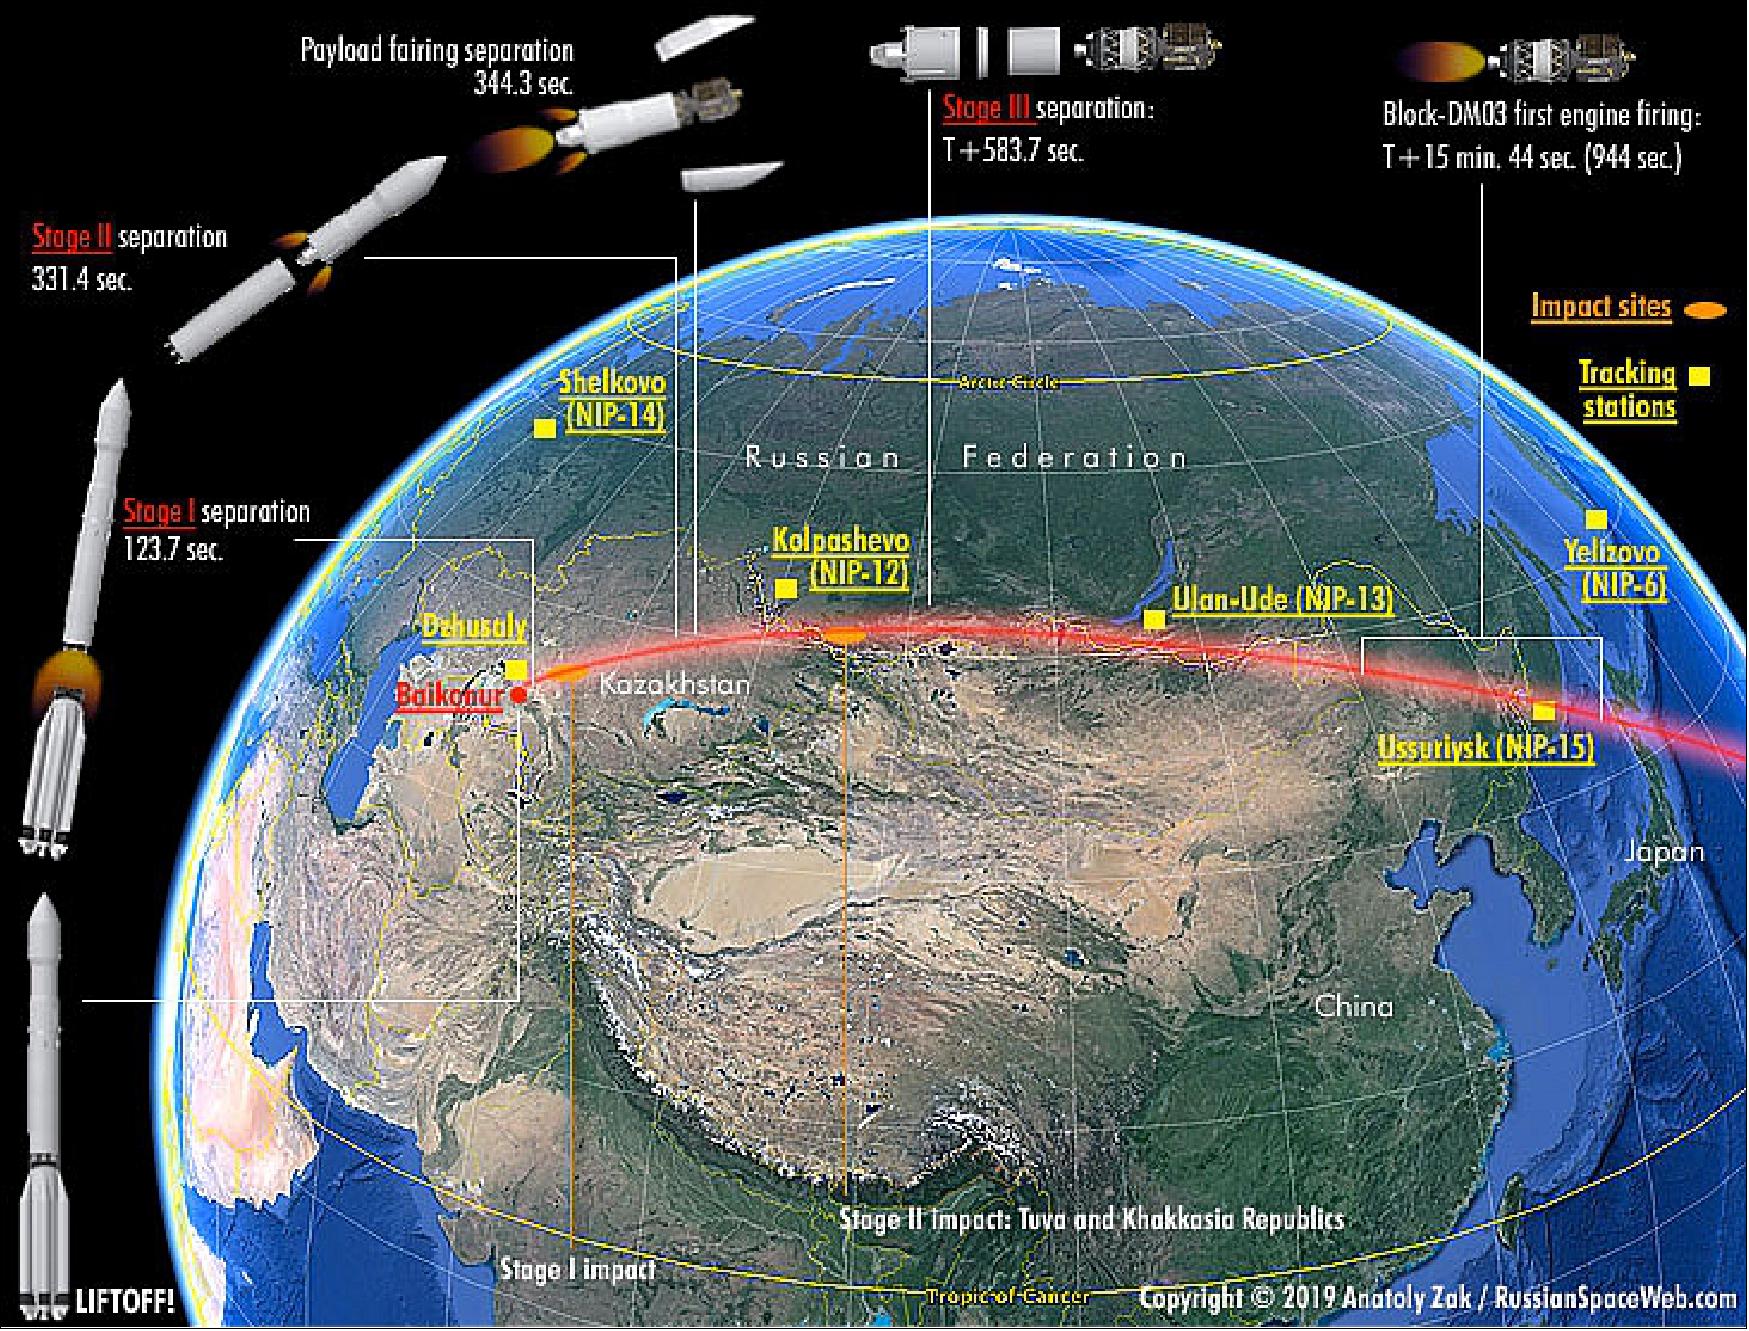 Figure 9: The launch sequence and ground track during the booster phase of the Spektr-RG launch (image credit: Anatoly Zak, Russian SpaceWeb.com)